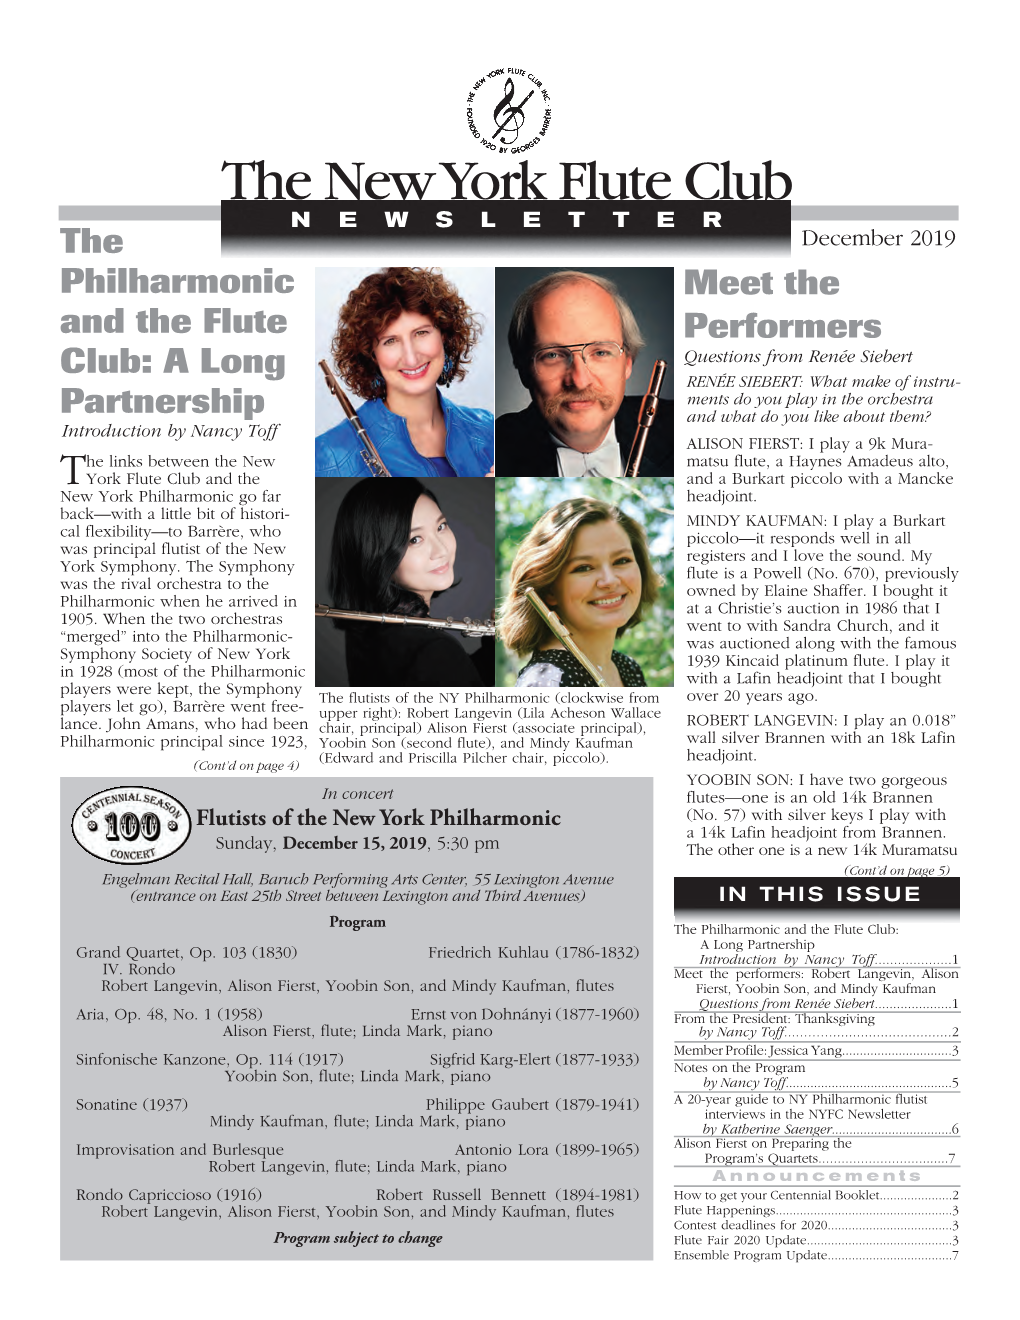 The Philharmonic and the Flute Club: a Long Partnership Meet the Performers